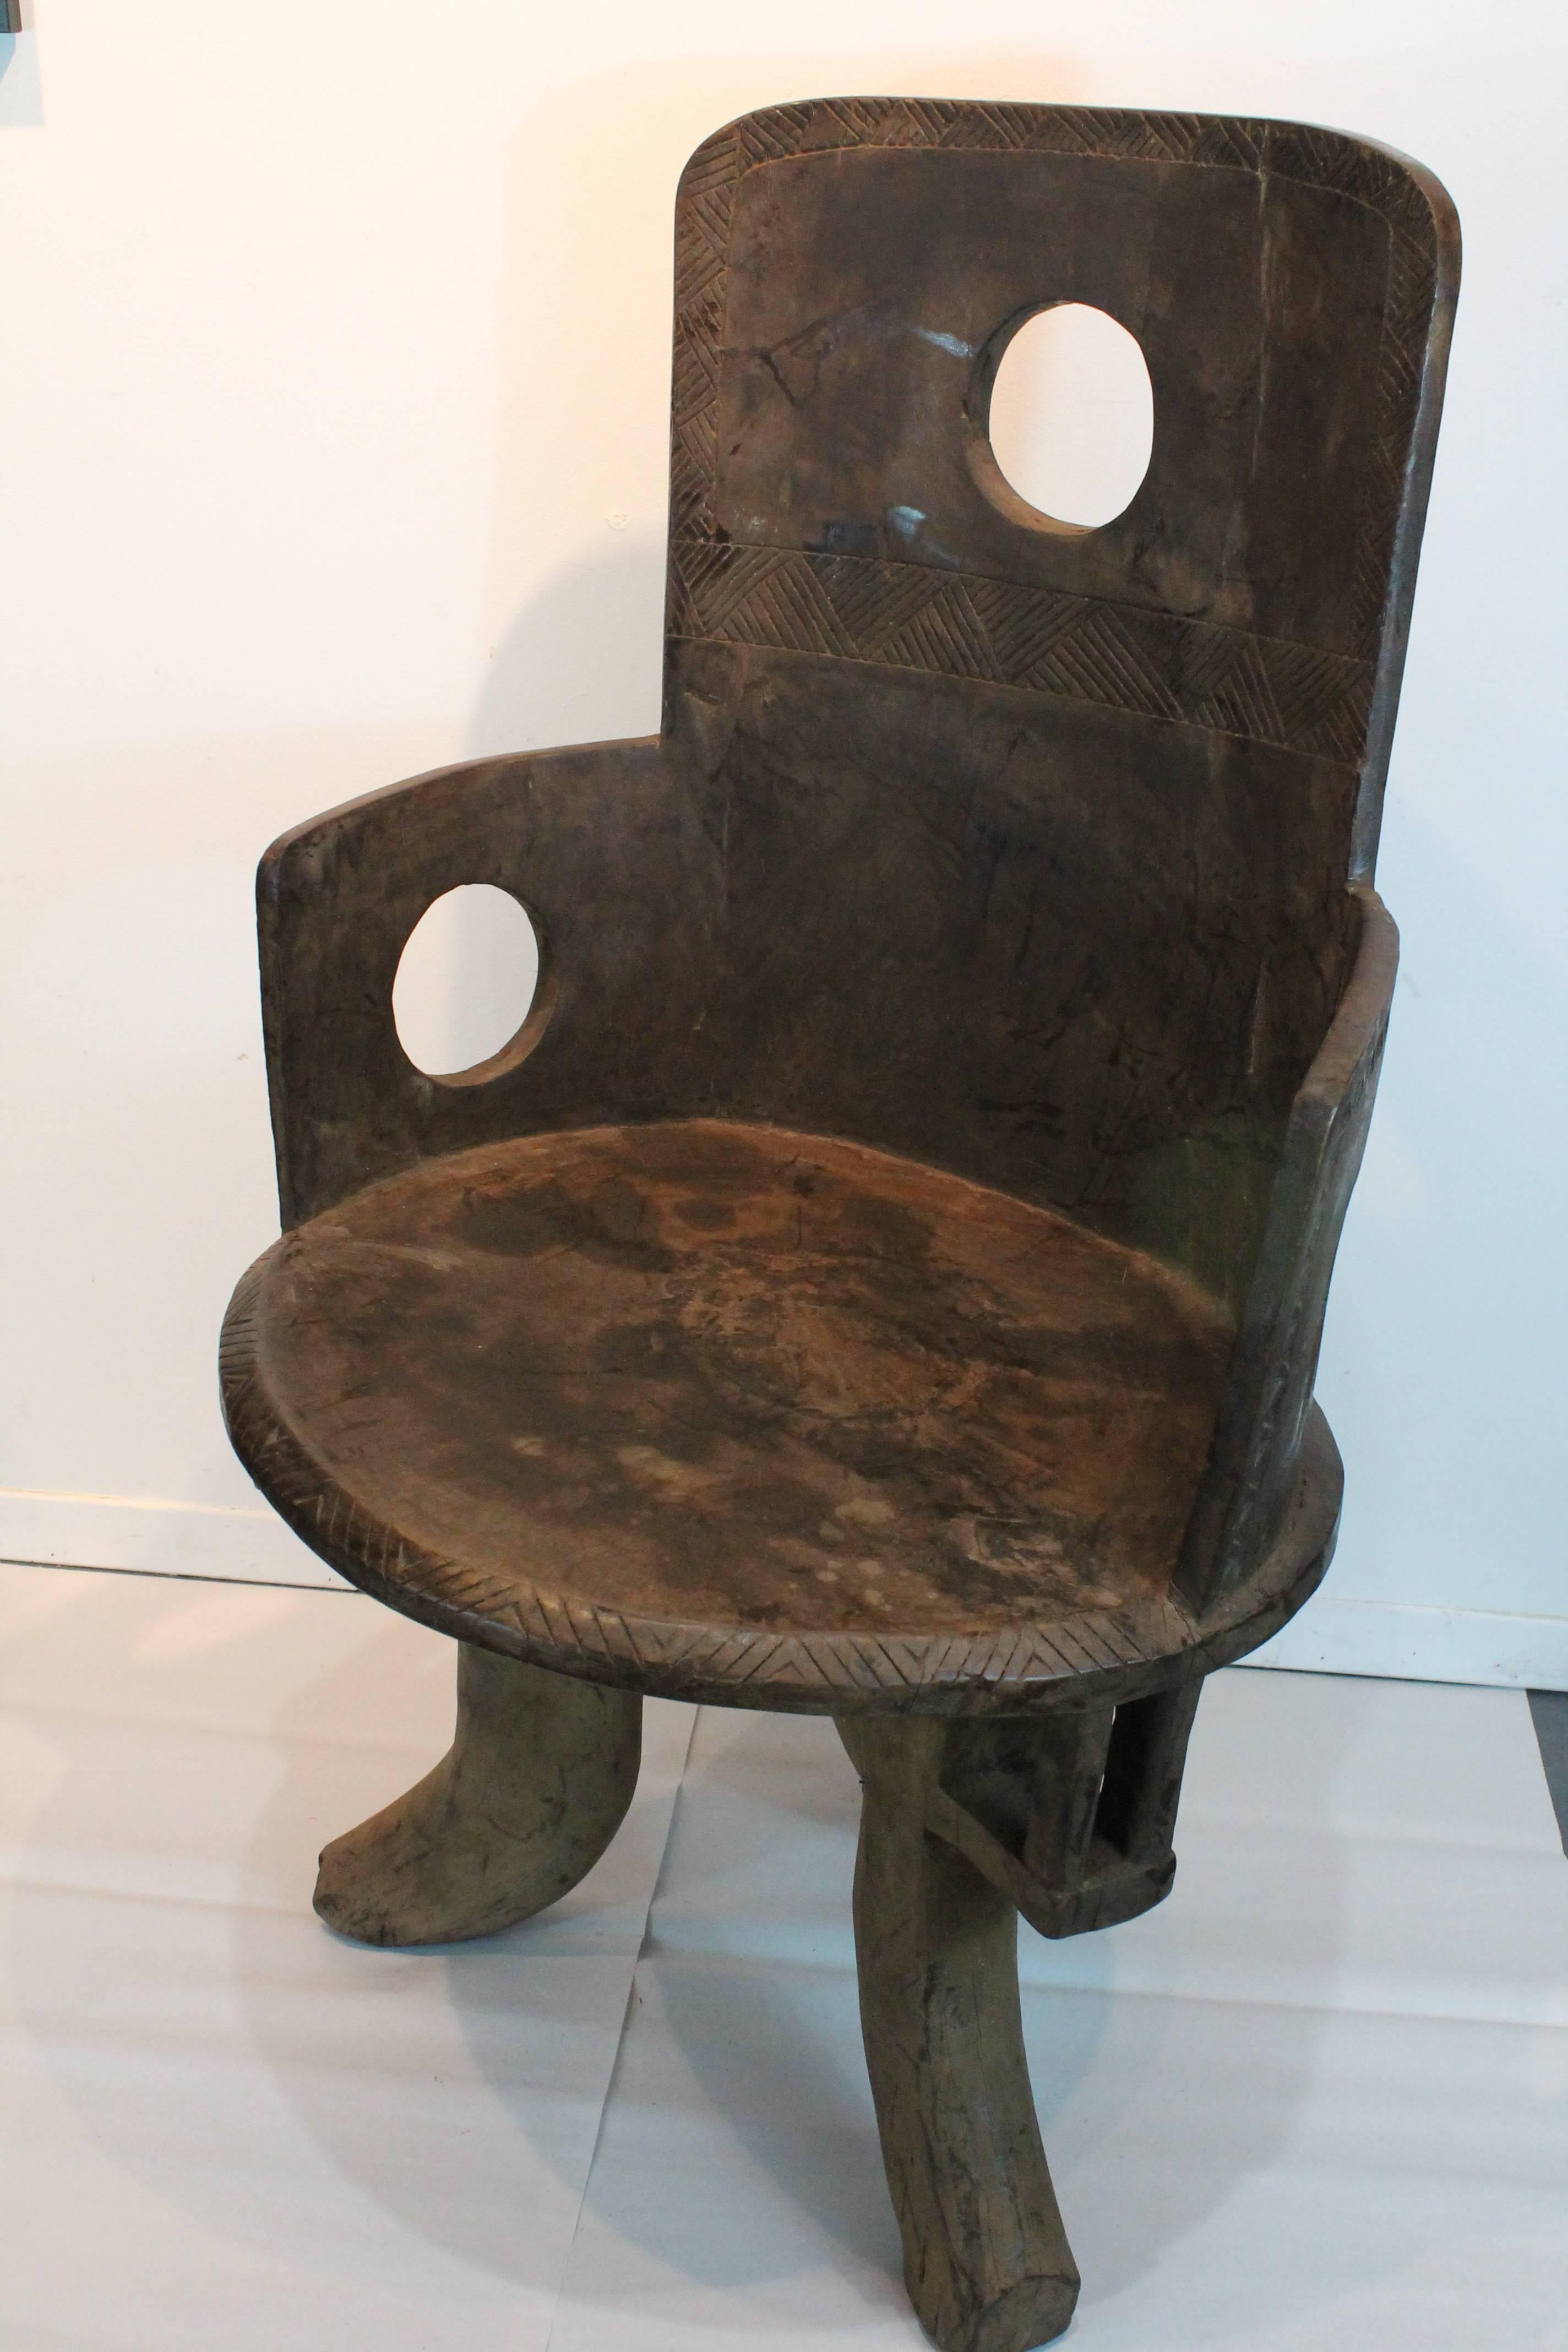 Unusual circular cutout designed Ethiopians Chief chair carved from a single piece of wood.
Fantastic carved geometric designs on the backrest, perimeter of the seat , and most prominently on the back of the chair.
Graphic sculptural presence and